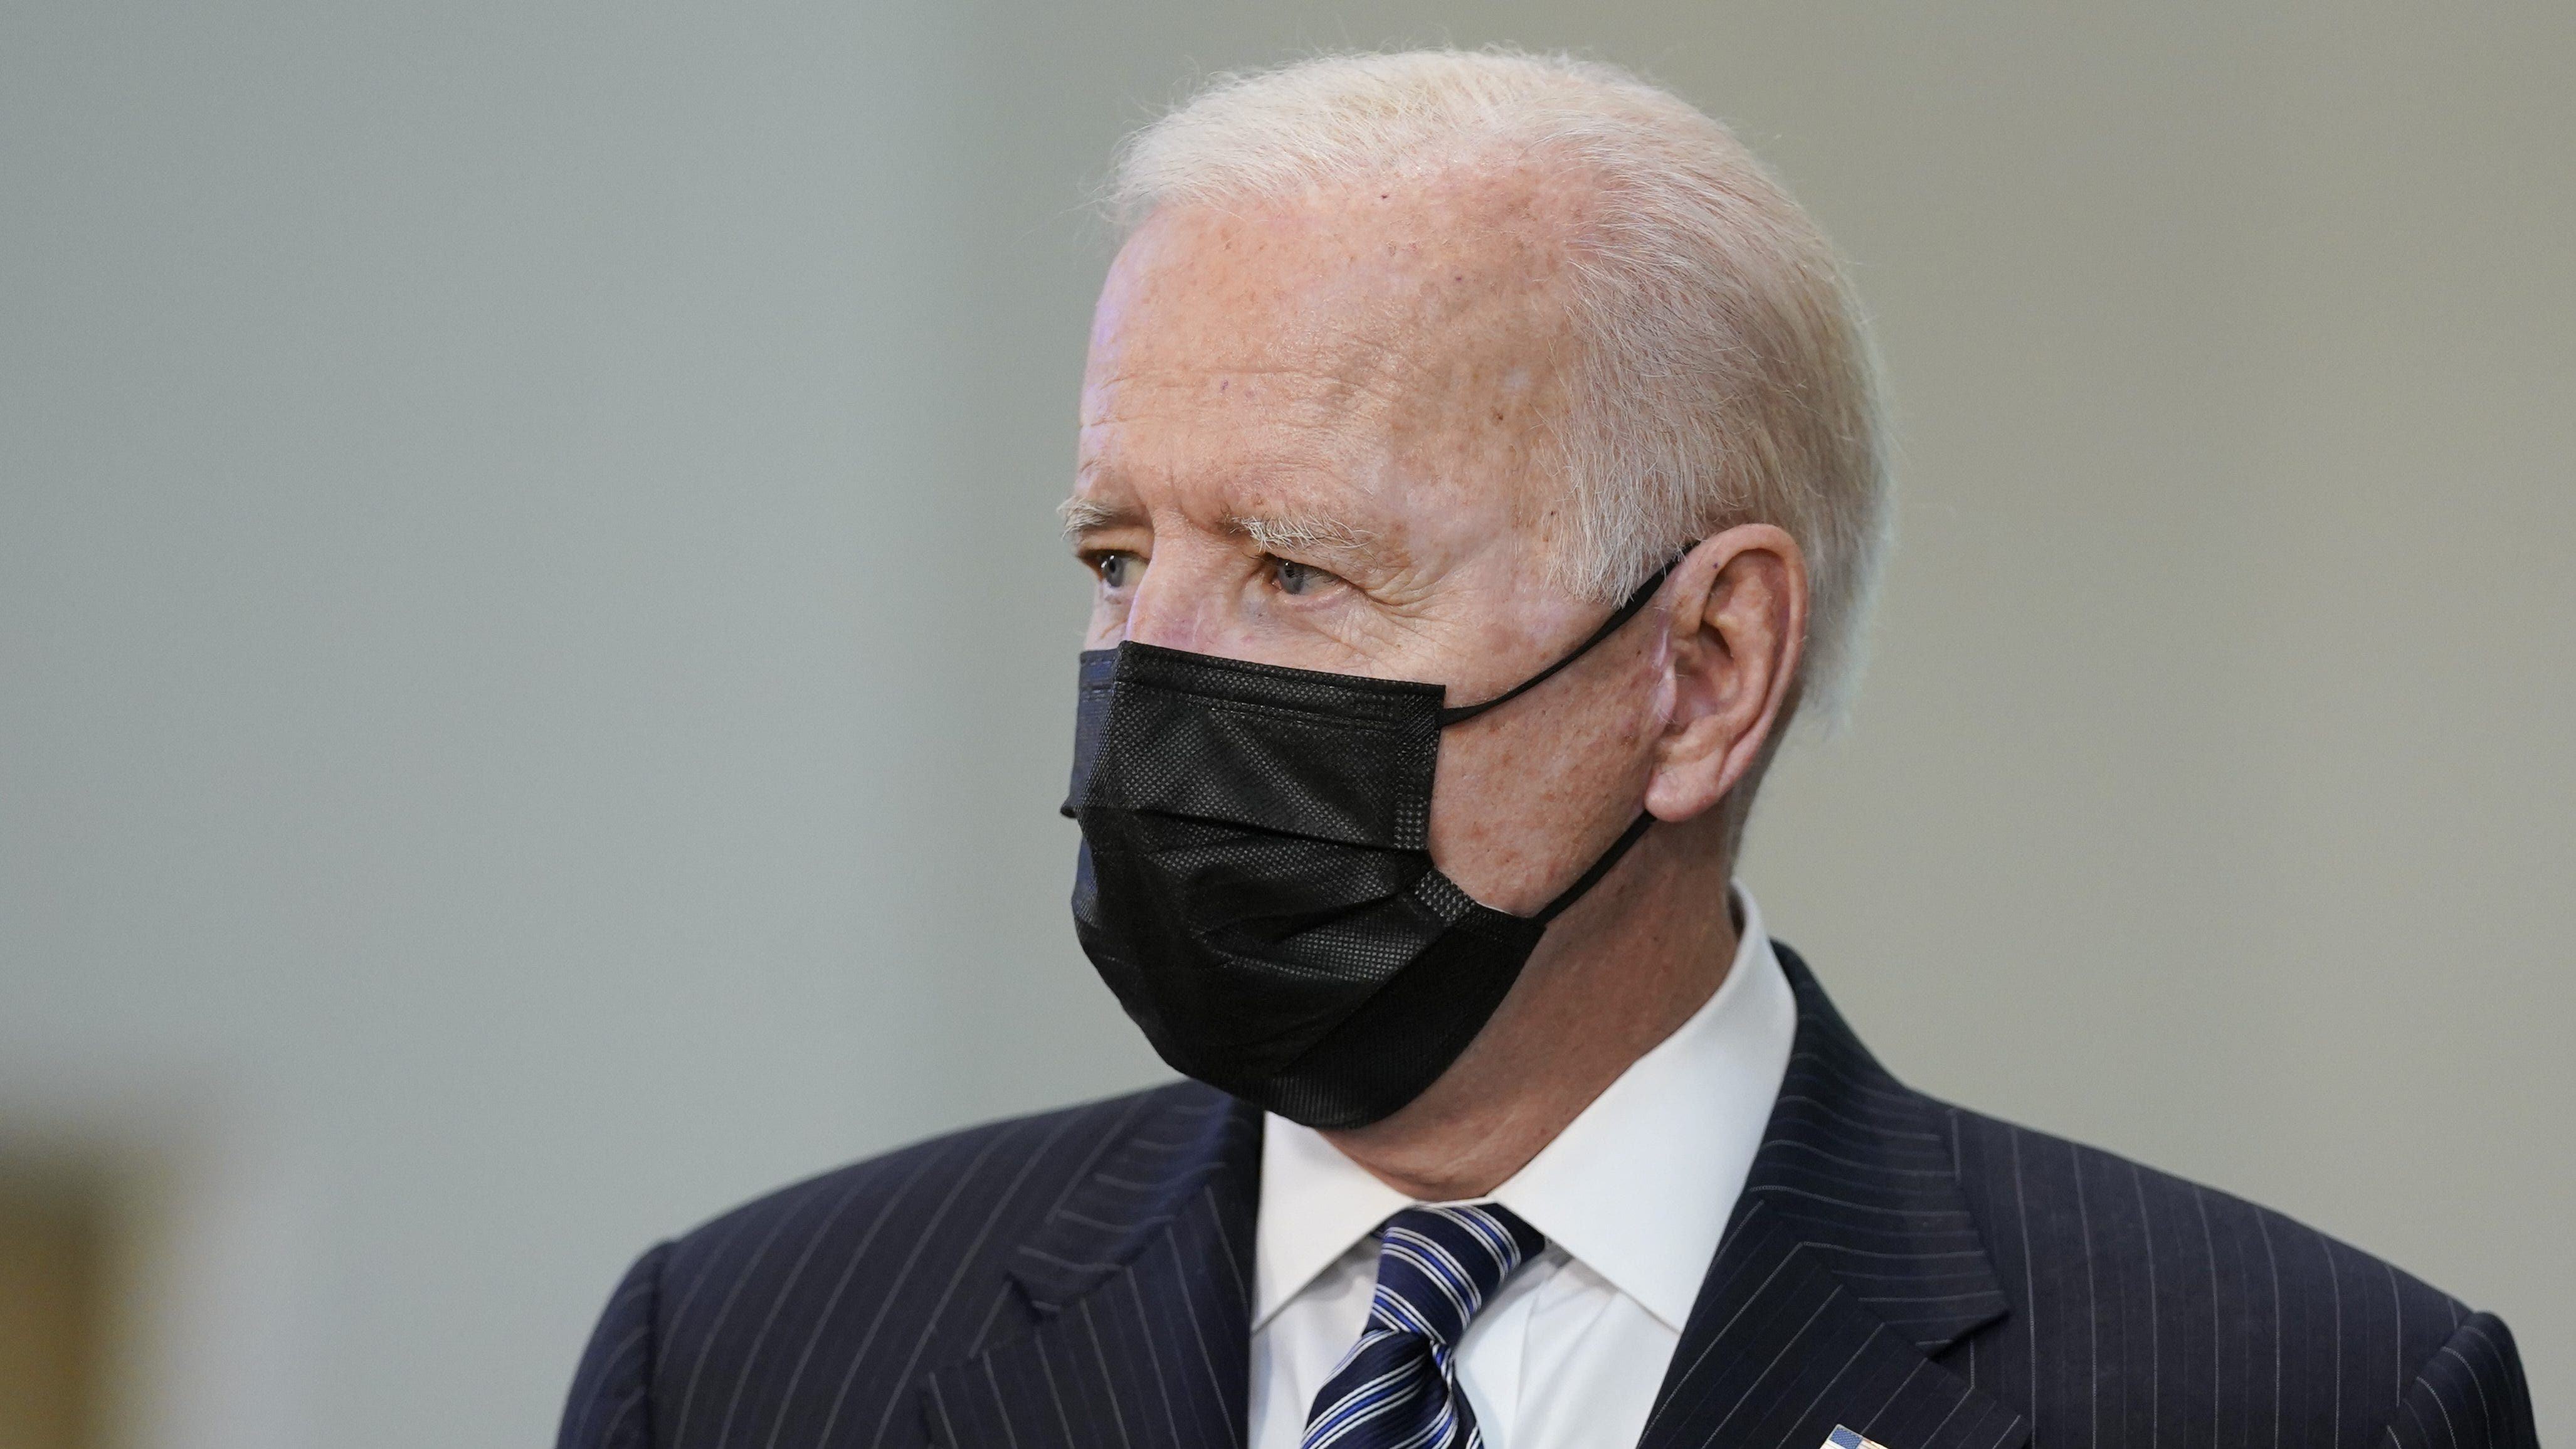 Biden leans over to tell someone to distance himself socially, ‘what I’m not doing’